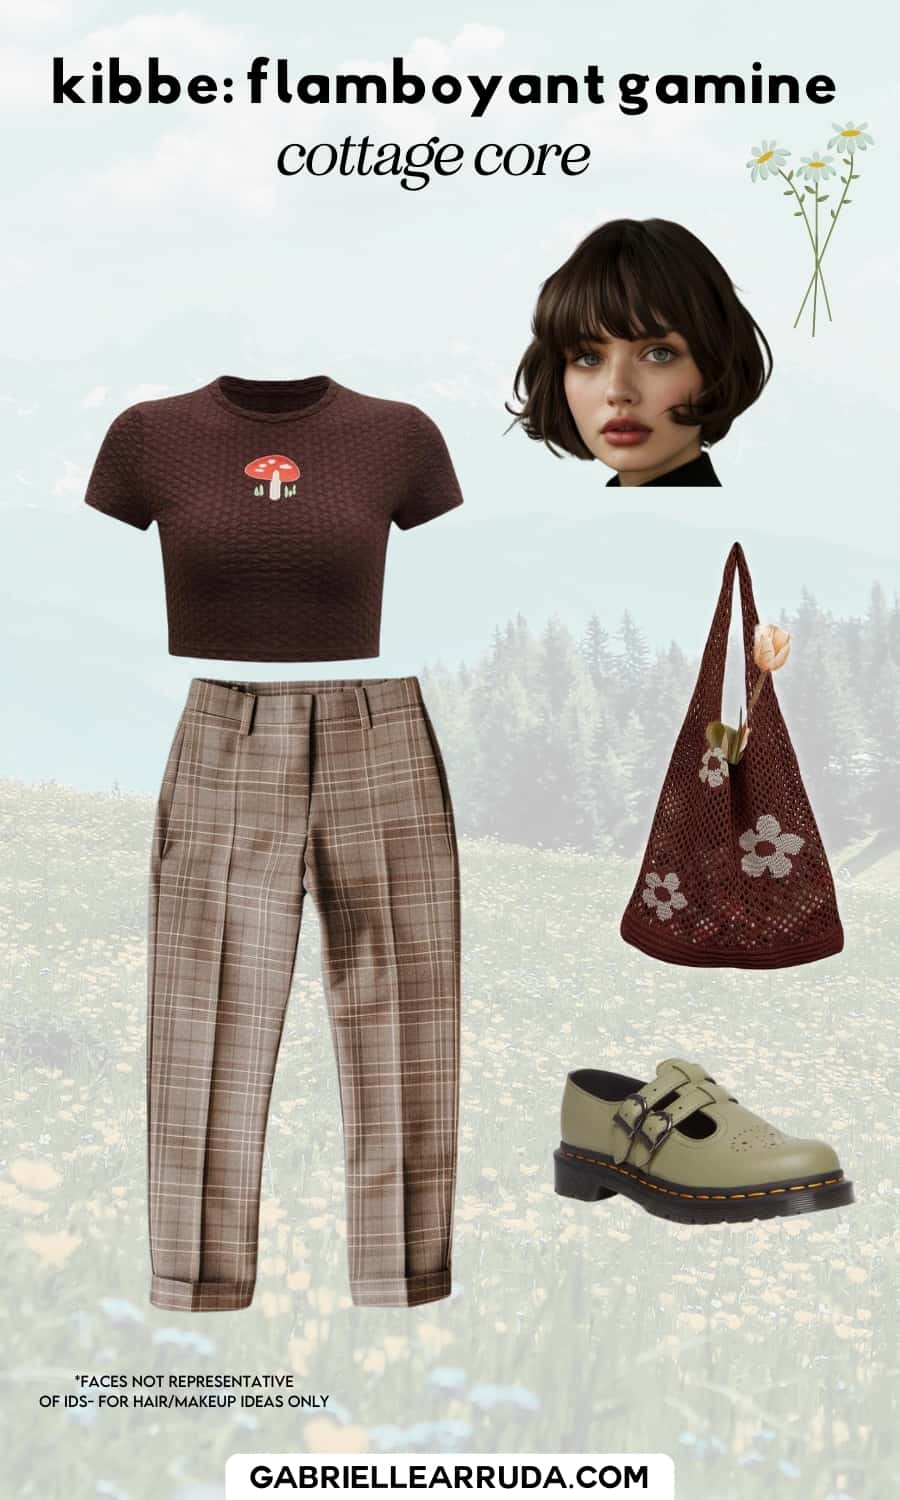 flamboyant gamine cottage core outfit